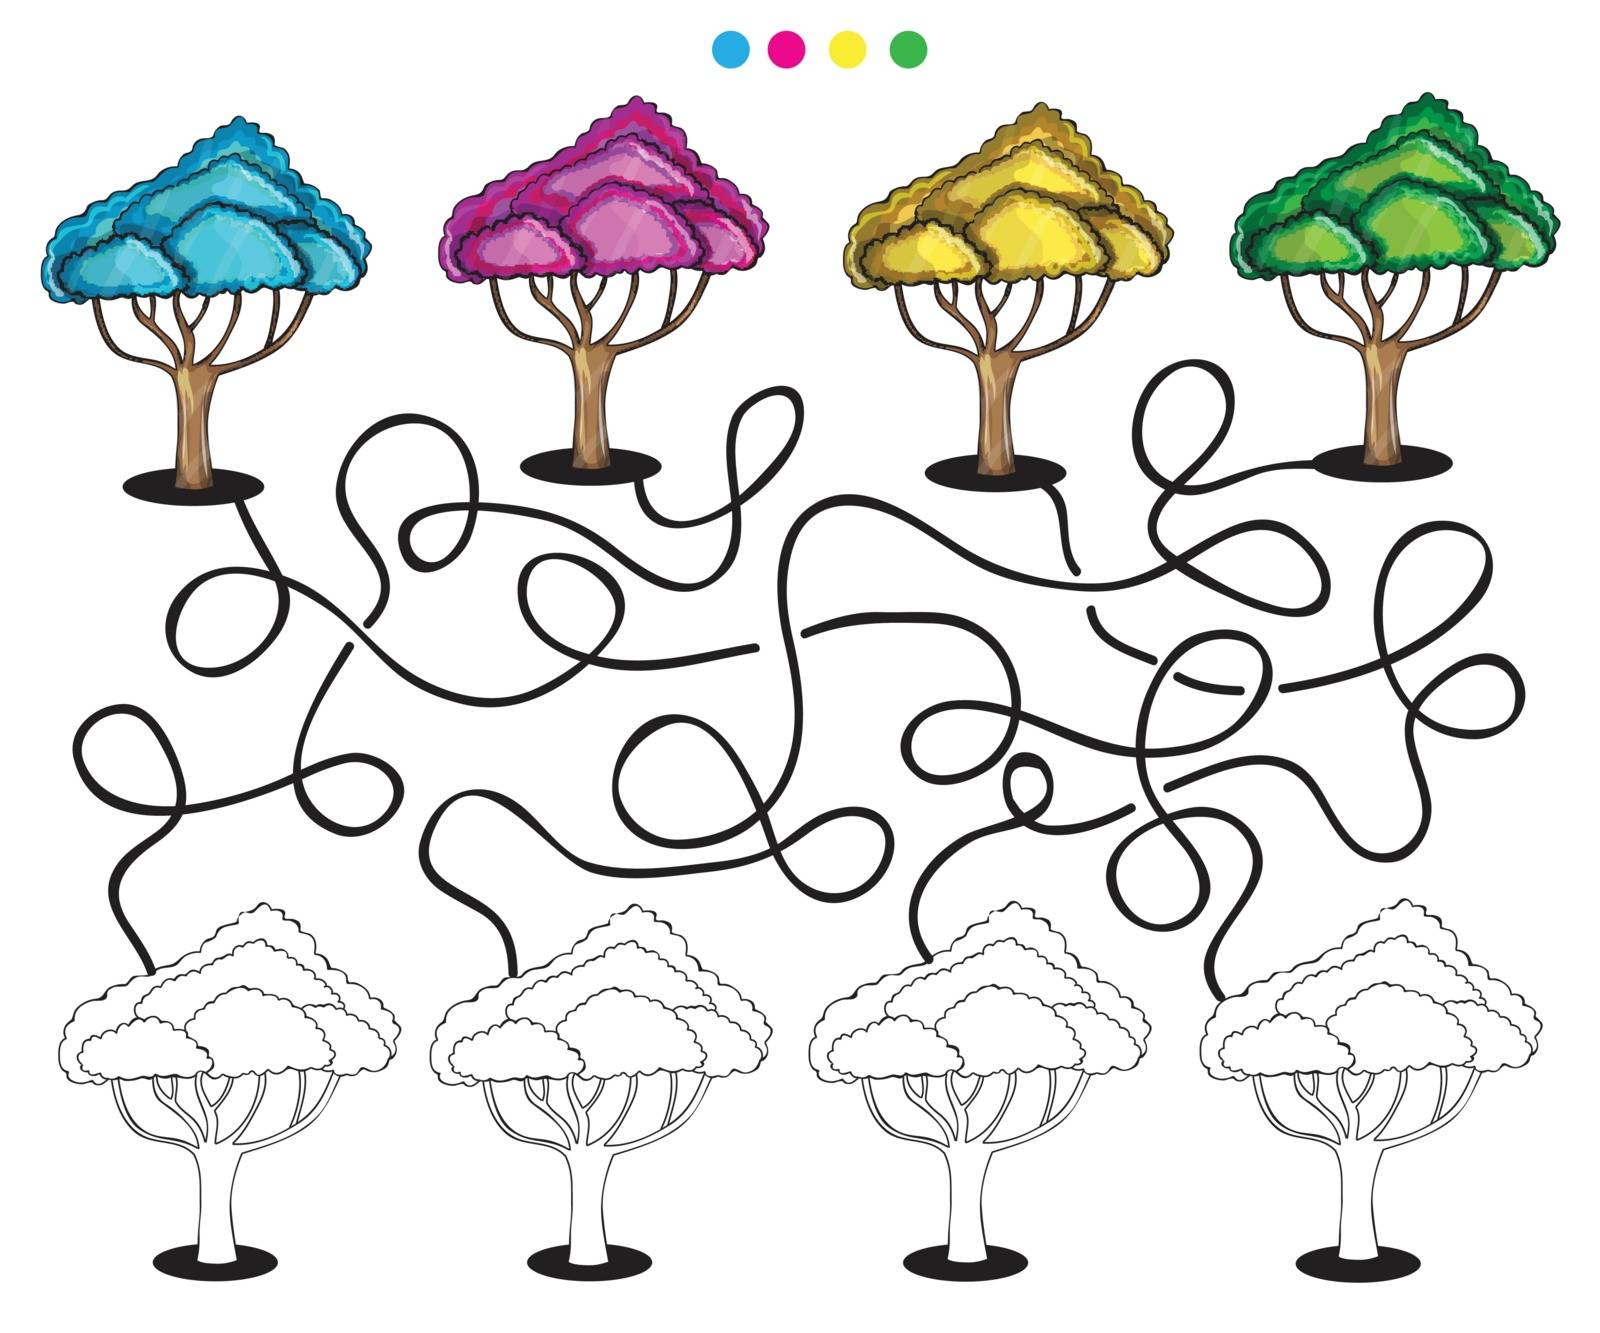 Visual puzzle and coloring page with trees